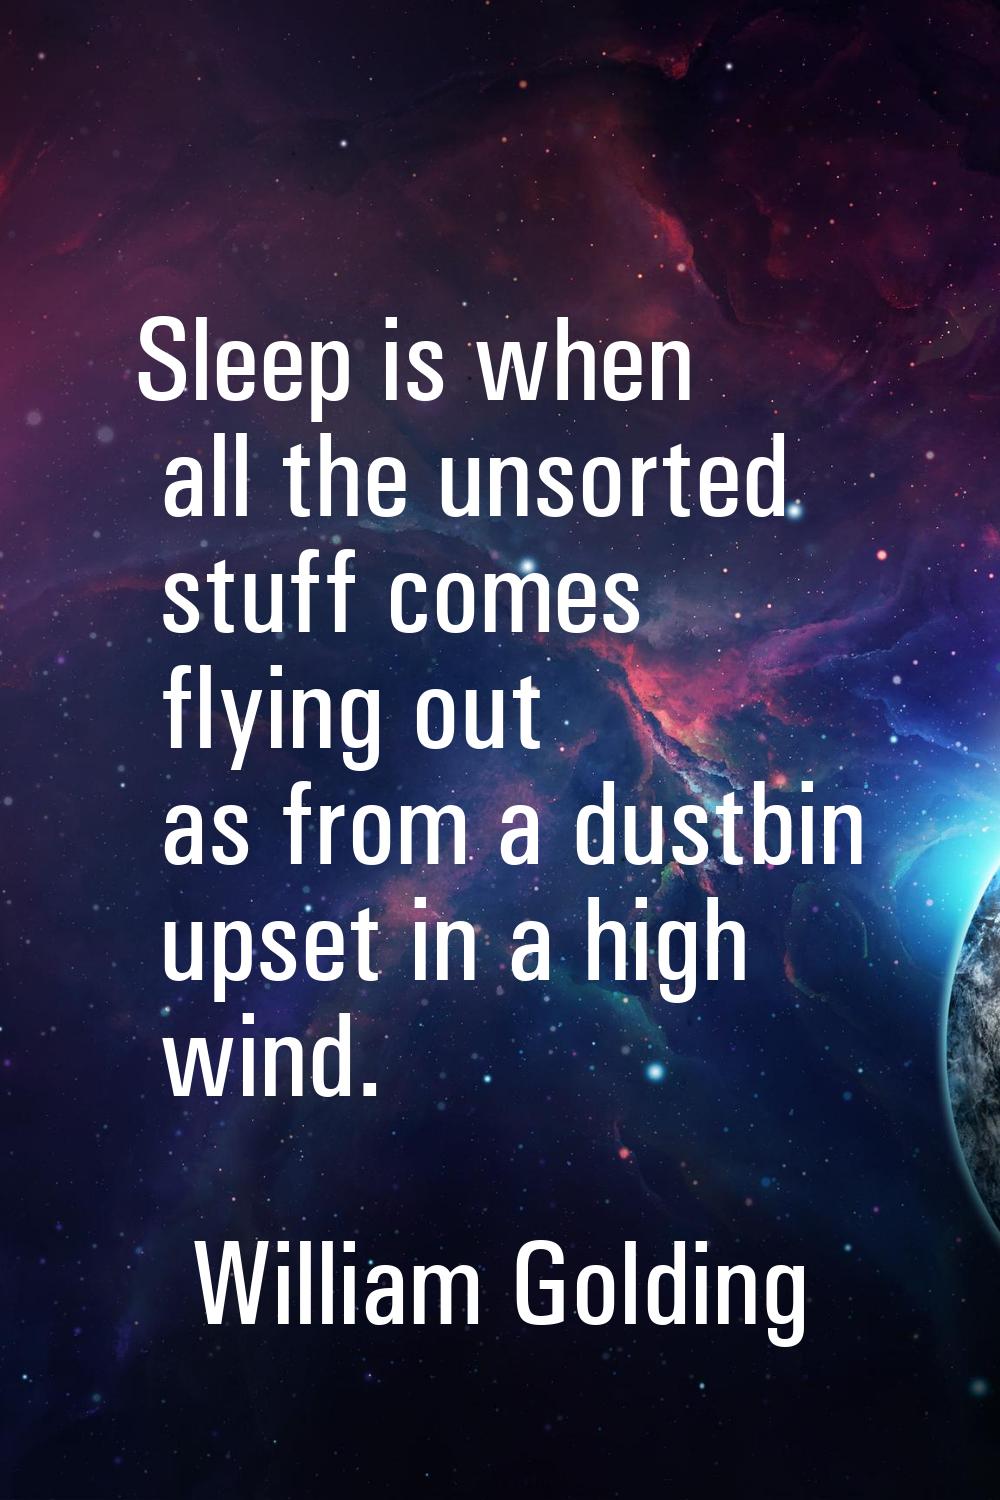 Sleep is when all the unsorted stuff comes flying out as from a dustbin upset in a high wind.